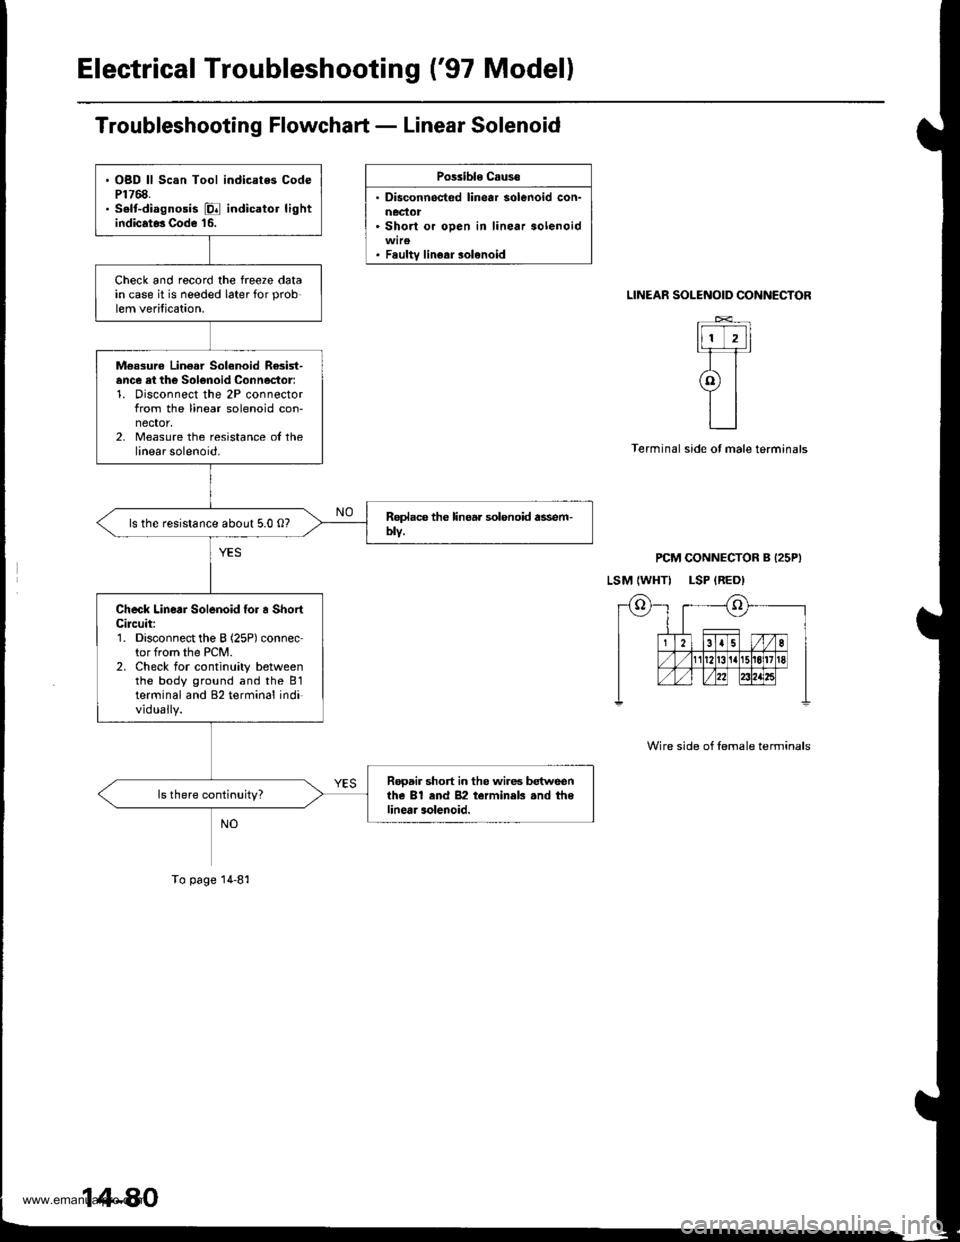 HONDA CR-V 1999 RD1-RD3 / 1.G Workshop Manual 
Electrical Troubleshooting (97 Modell
Troubleshooting Flowchart - Linear Solenoid
Possible Caus€
. Disconnocted linear solenoid con-
. Short or oDen in linear solenoid
. Fsultv linear solenoid
SOL